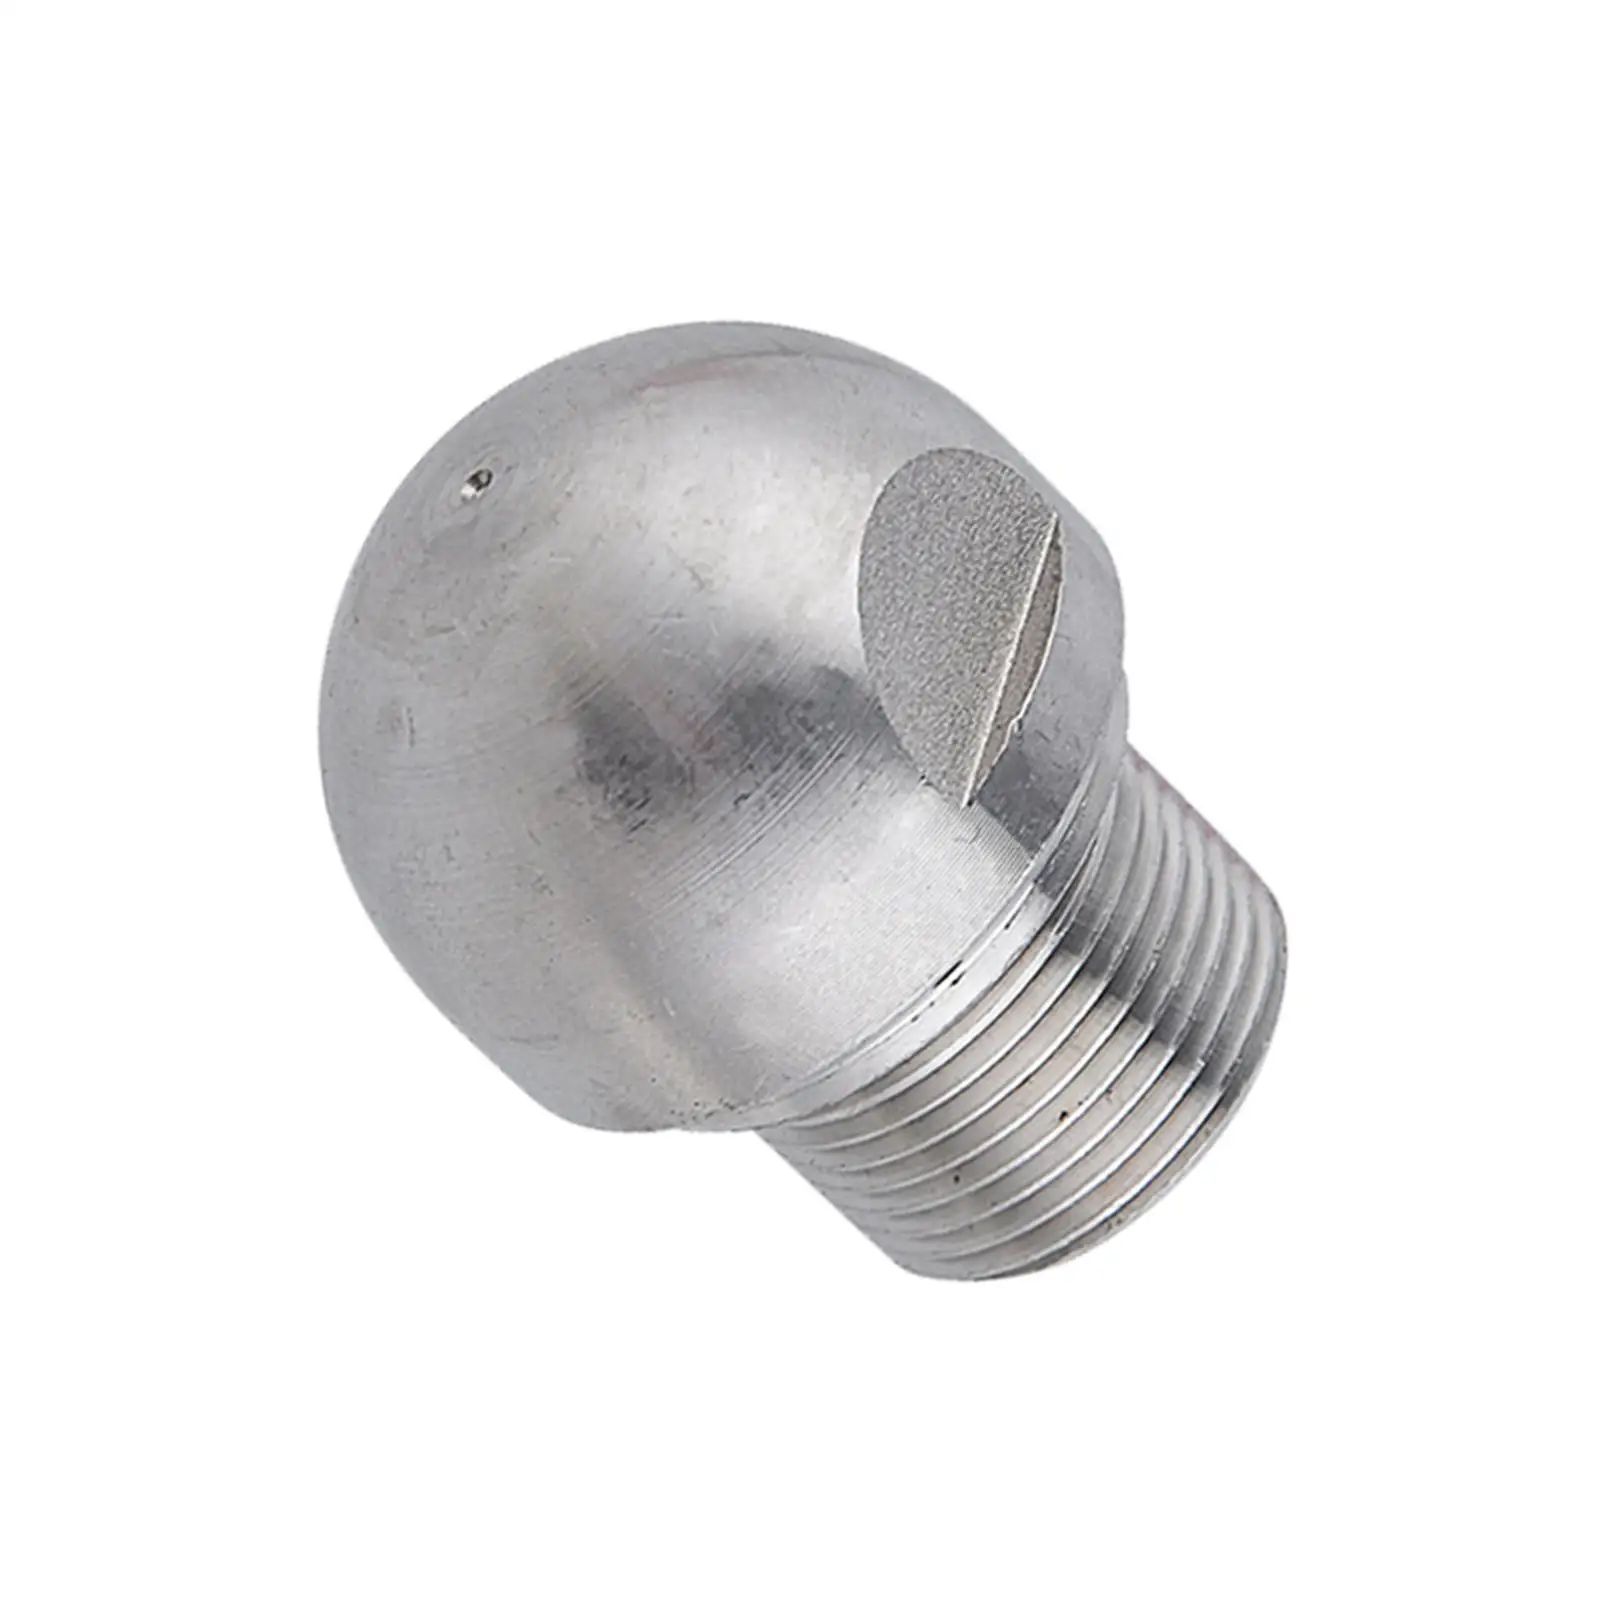 Button Nose Sewer Jetting Nozzle Pressure up to 300Bar 1/4 Thread for Car Home Pipe Cleaning Machine Pressure Washer Accessories